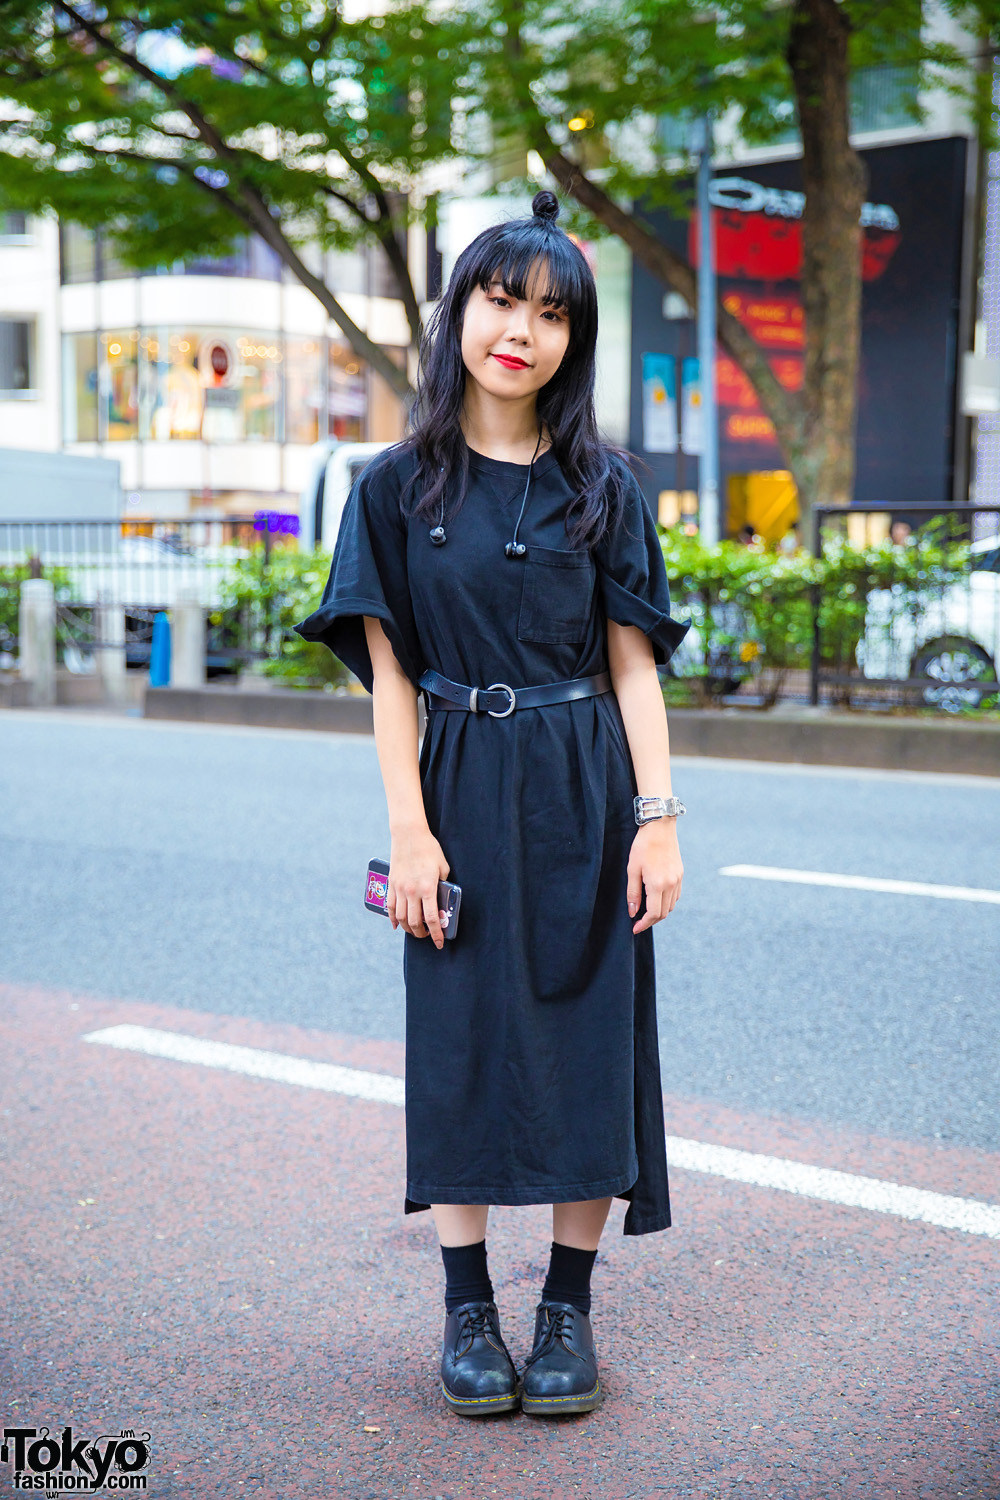 Japanese Makeup Artist in All Black Street Style w/ Jouetie Dress, Dr. Martens Shoes, Prada Backpack & Bubbles Cuff